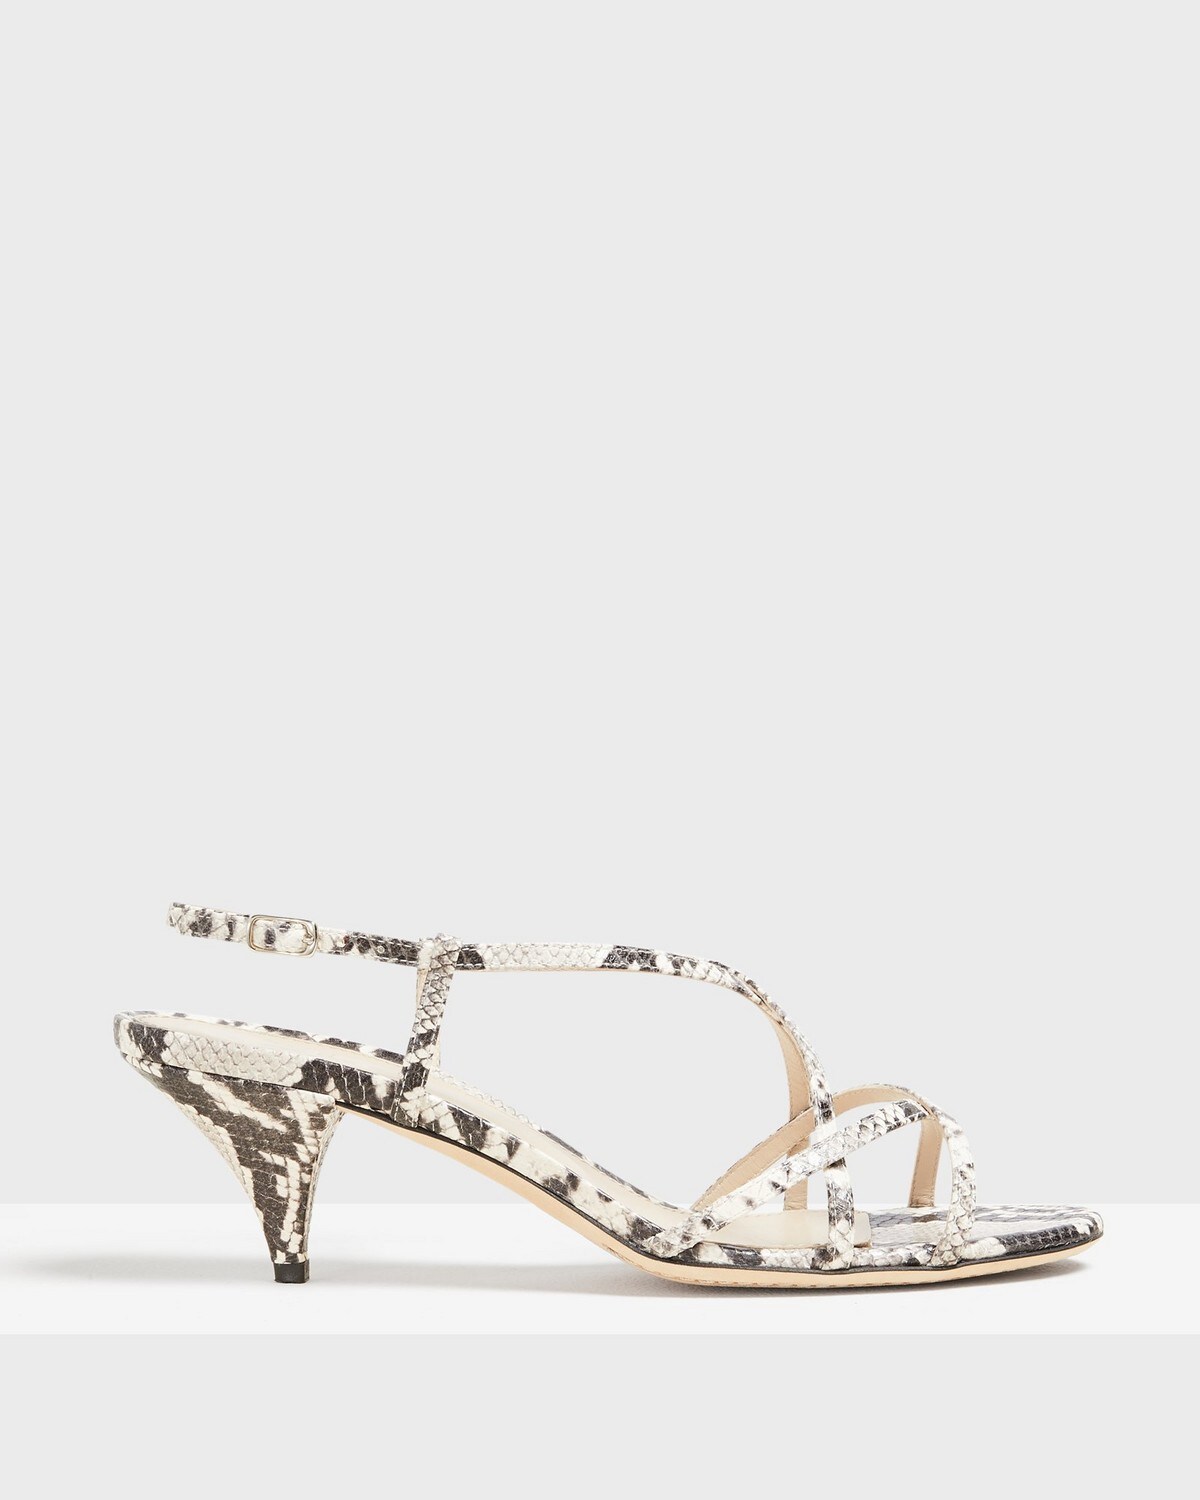 Theory Strappy Sandal in Python Print Leather